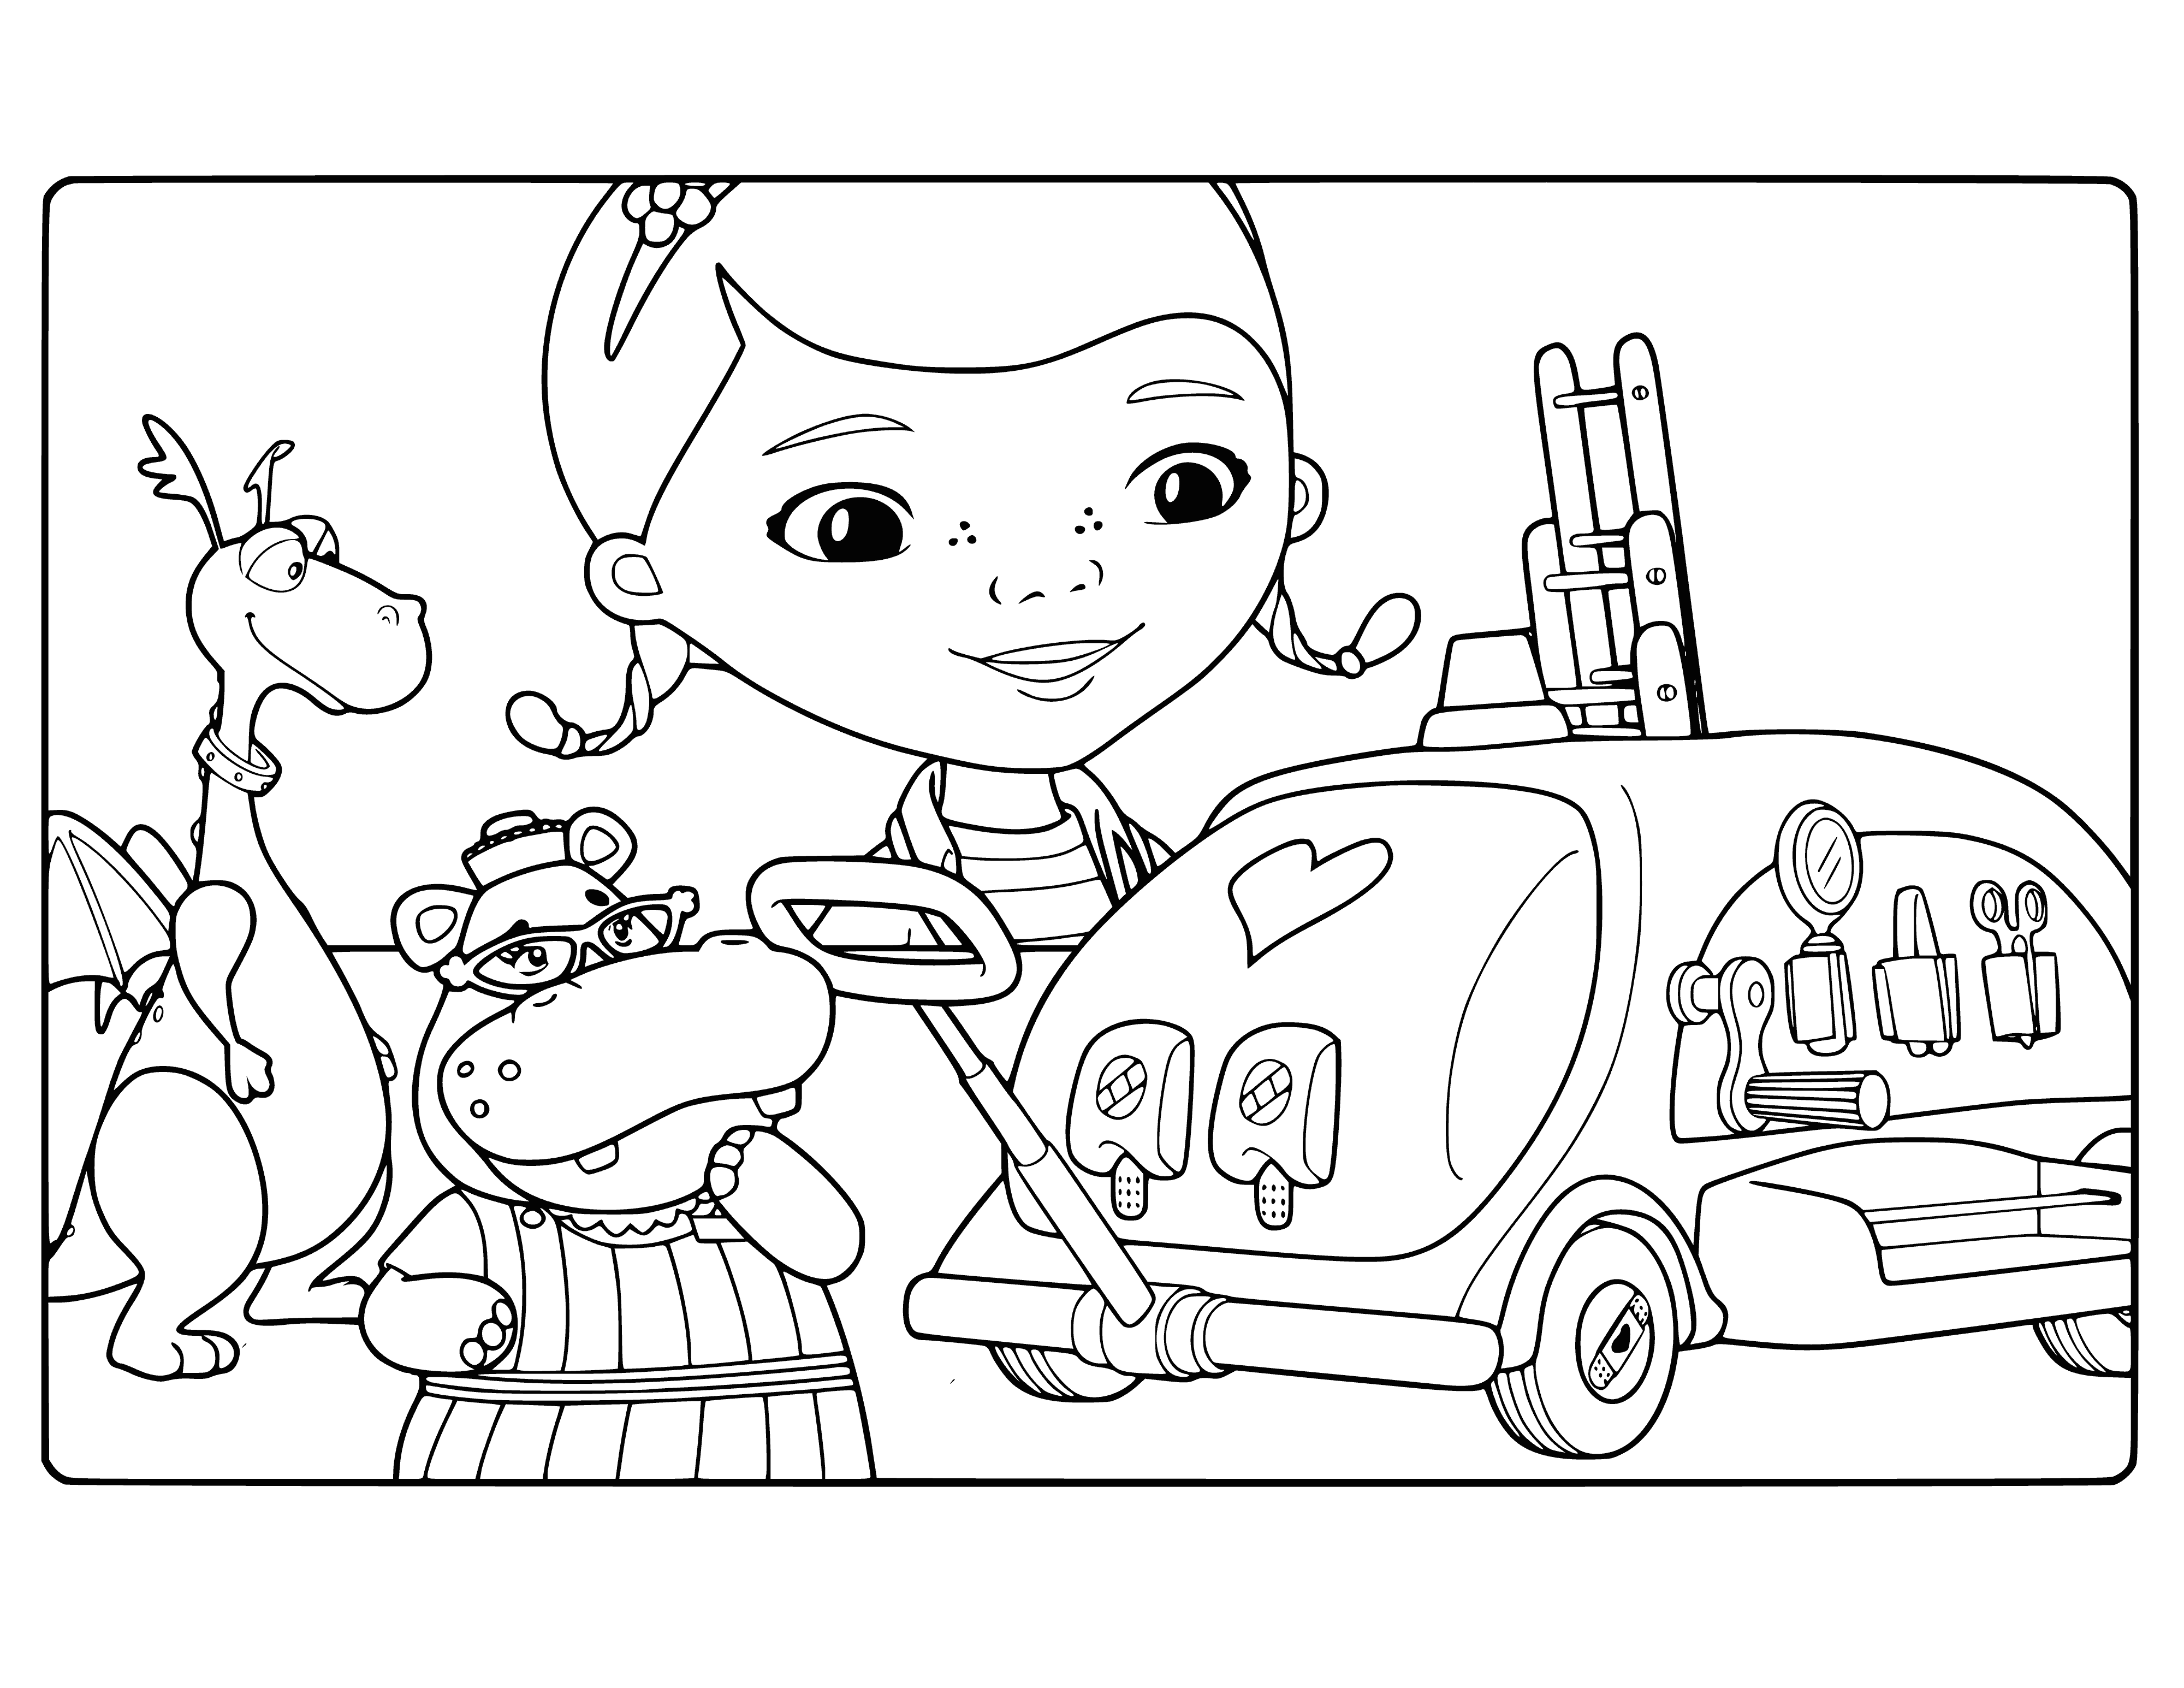 coloring page: Girl in doctor's outfit examines stuffed animal with stethoscope, giving it a checkup.